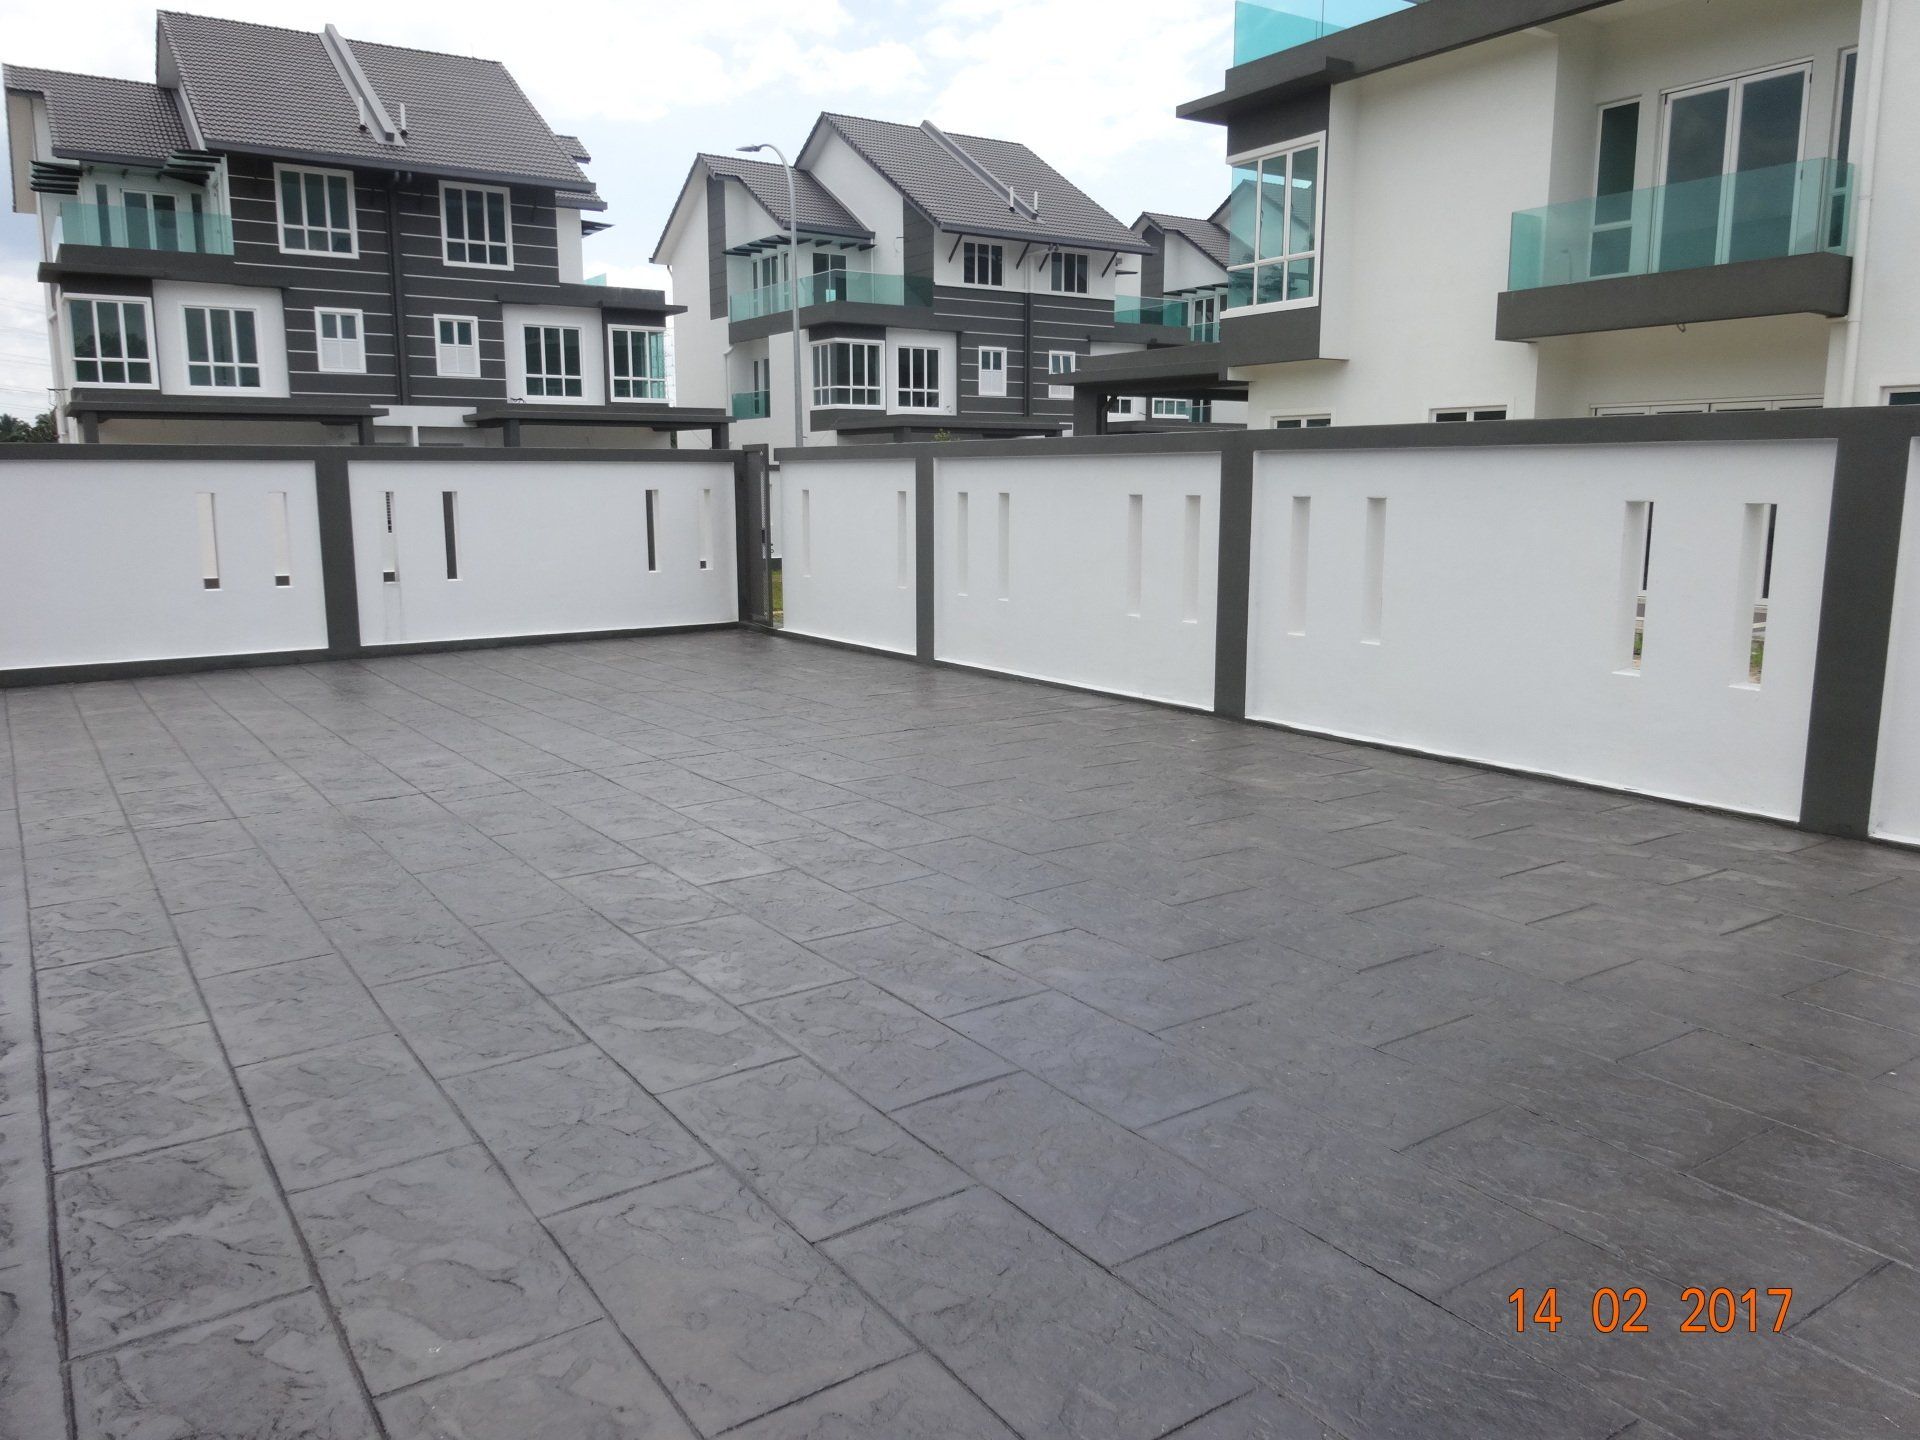 Stamped Concrete Malaysia - Master Materials Manufacturing Sdn. Bhd.